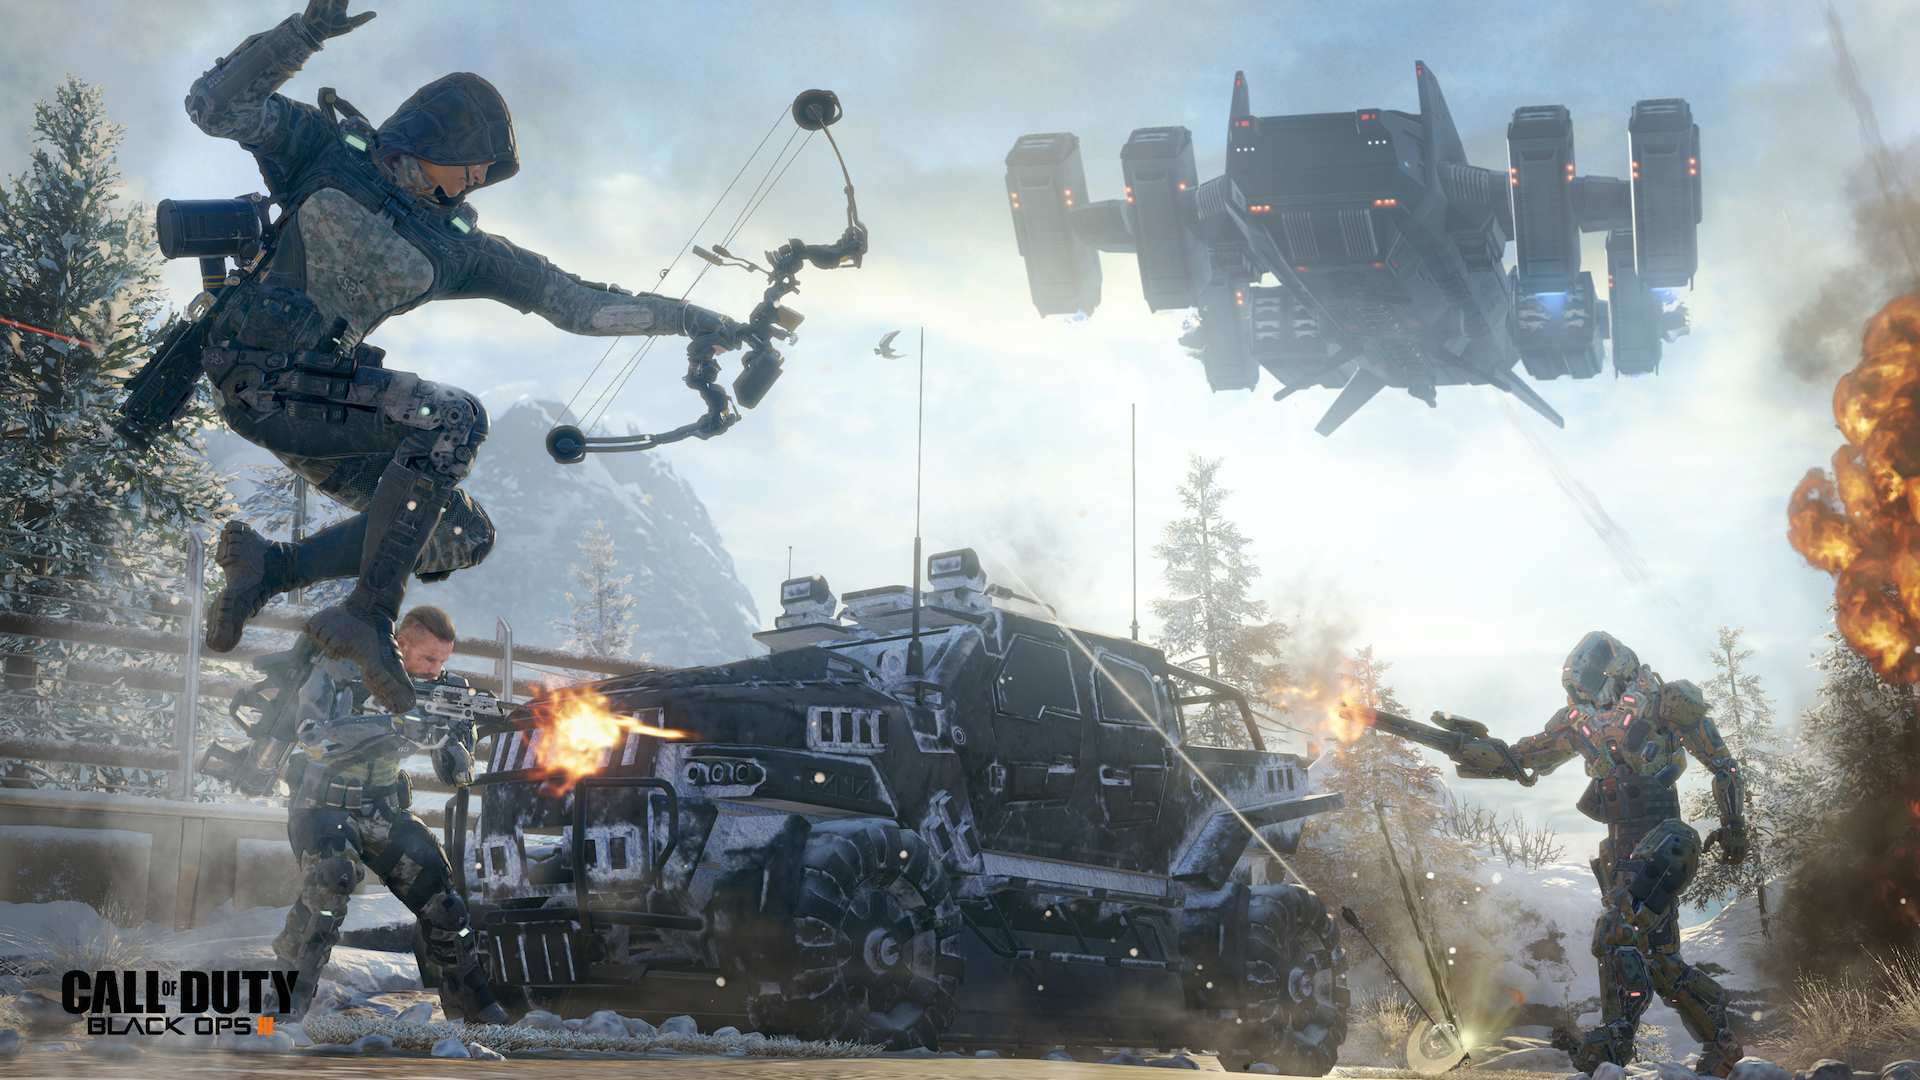 “Call of Duty: Black Ops III” Has Brutal One-Hit Difficulty - You Get Shot Once, You Die